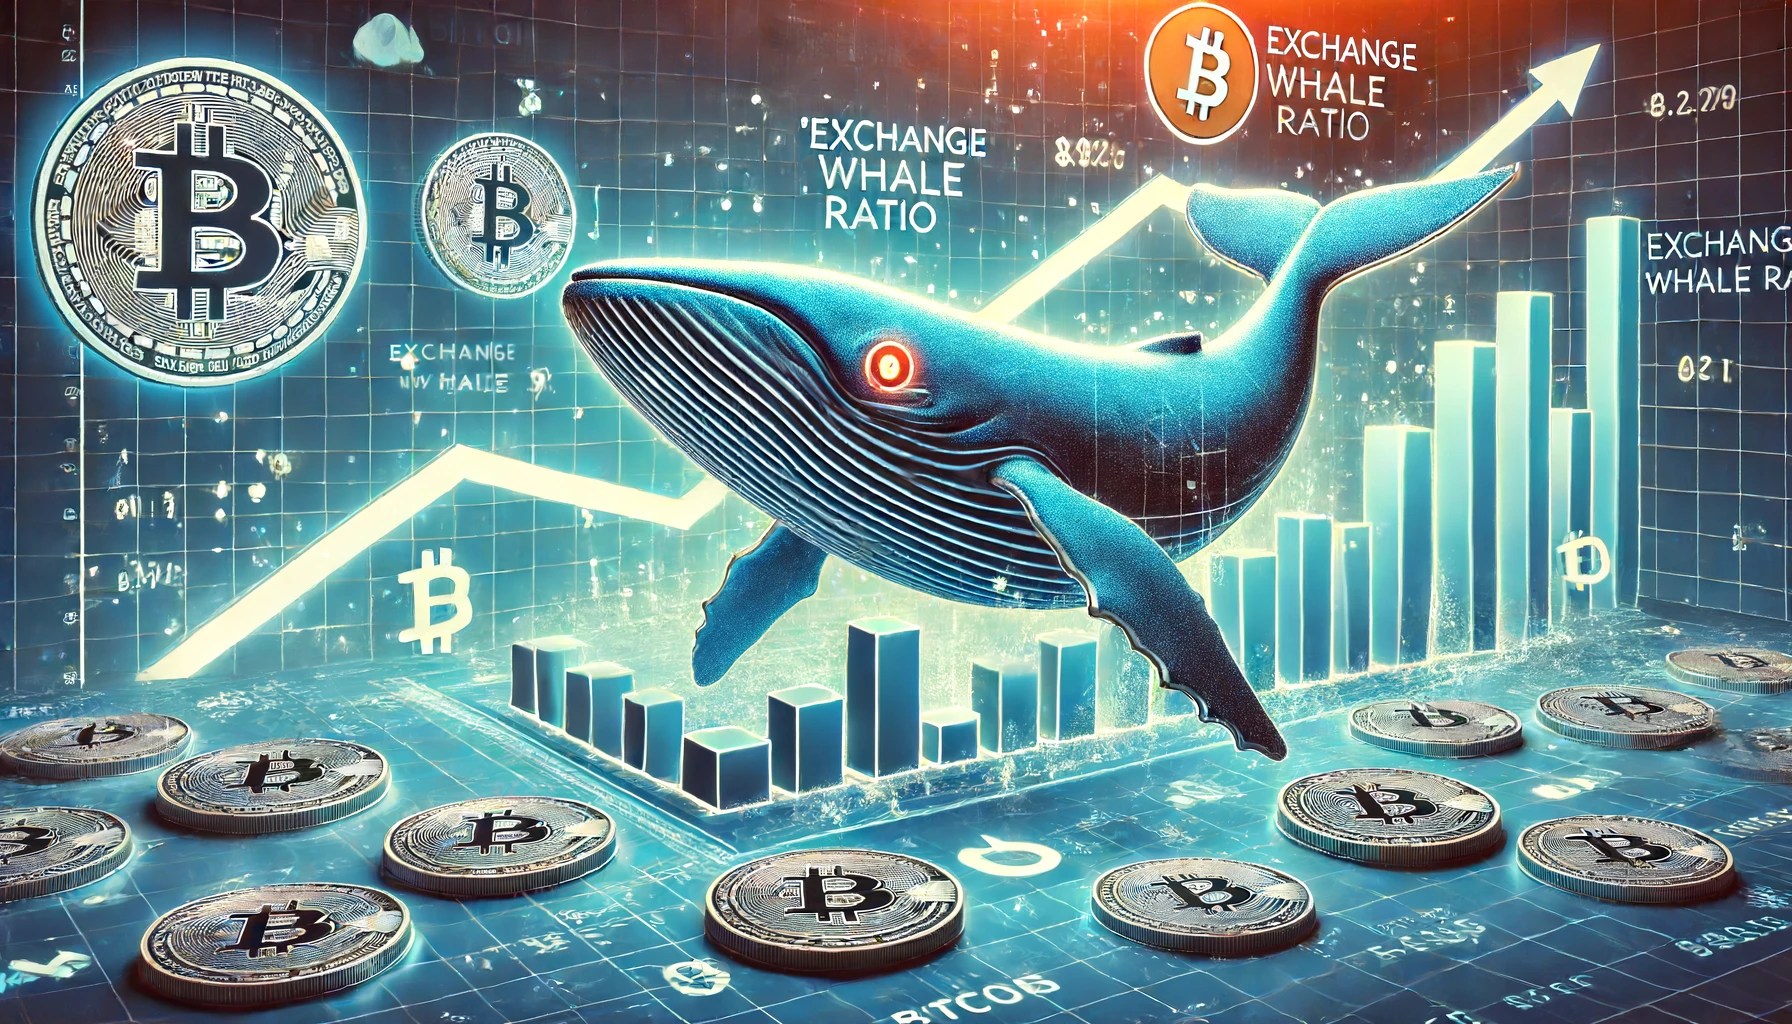 Bitcoin “Exchange Whale Ratio” Is Rising: Why This Could Be Alarming